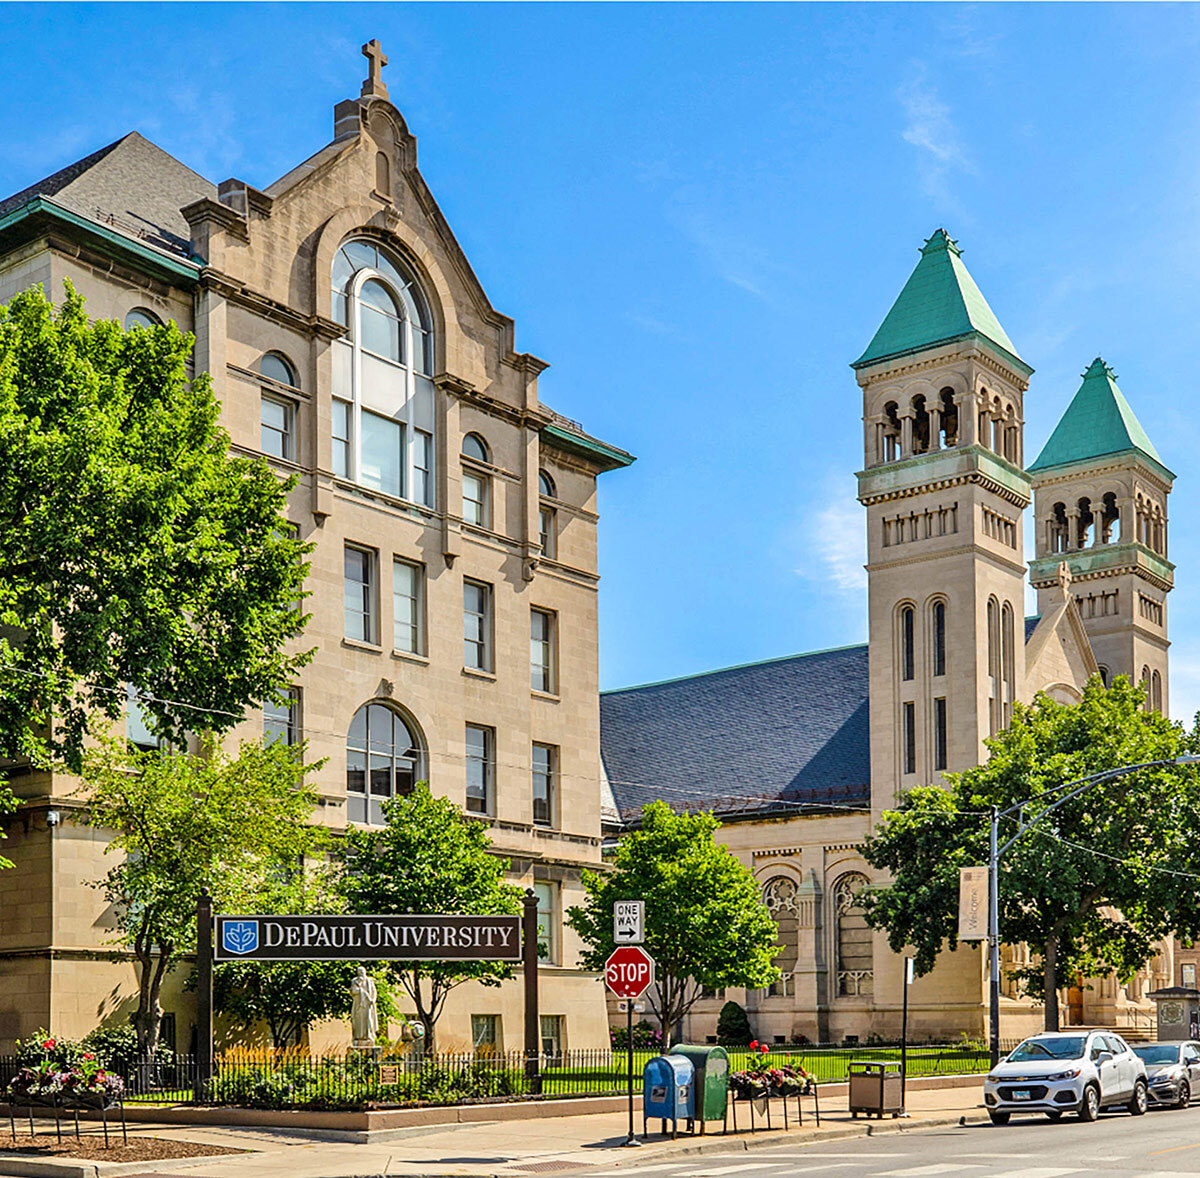 The St. Vincent de Paul Church on the Lincoln Park Campus is shown in 2022. There is a sign in front of the building that reads ‘DePaul University’ with a blue shield symbol decorated with a white outline of the Tree of Wisdom next to it.